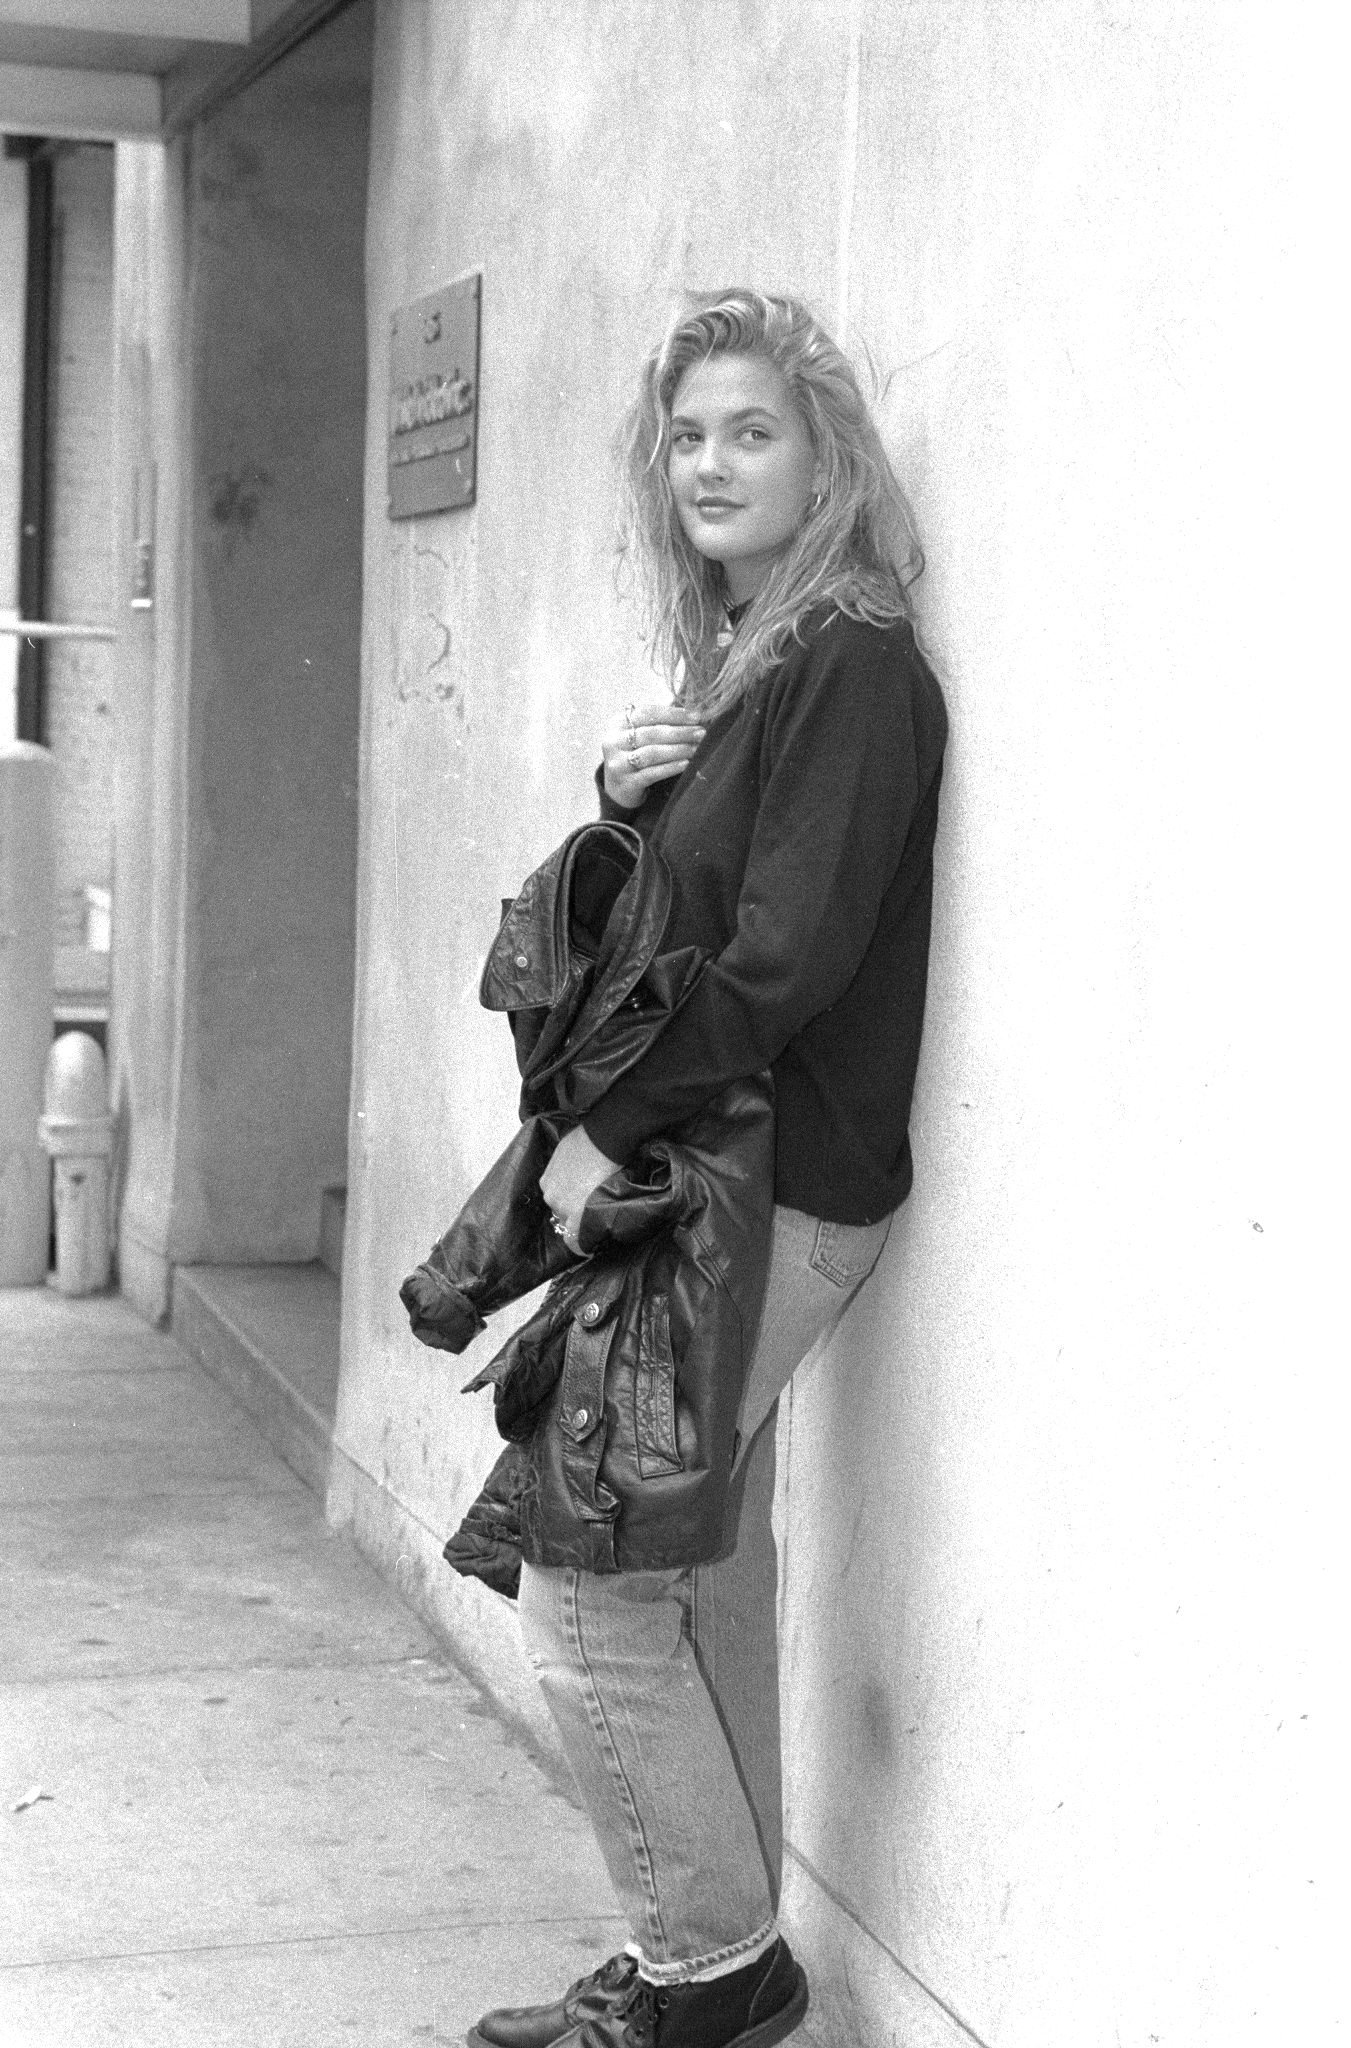 Drew Barrymore on the street outside Sally Jessy Raphael's show, where she plugged her book, "Little Girl Lost." | Photo: Getty Images